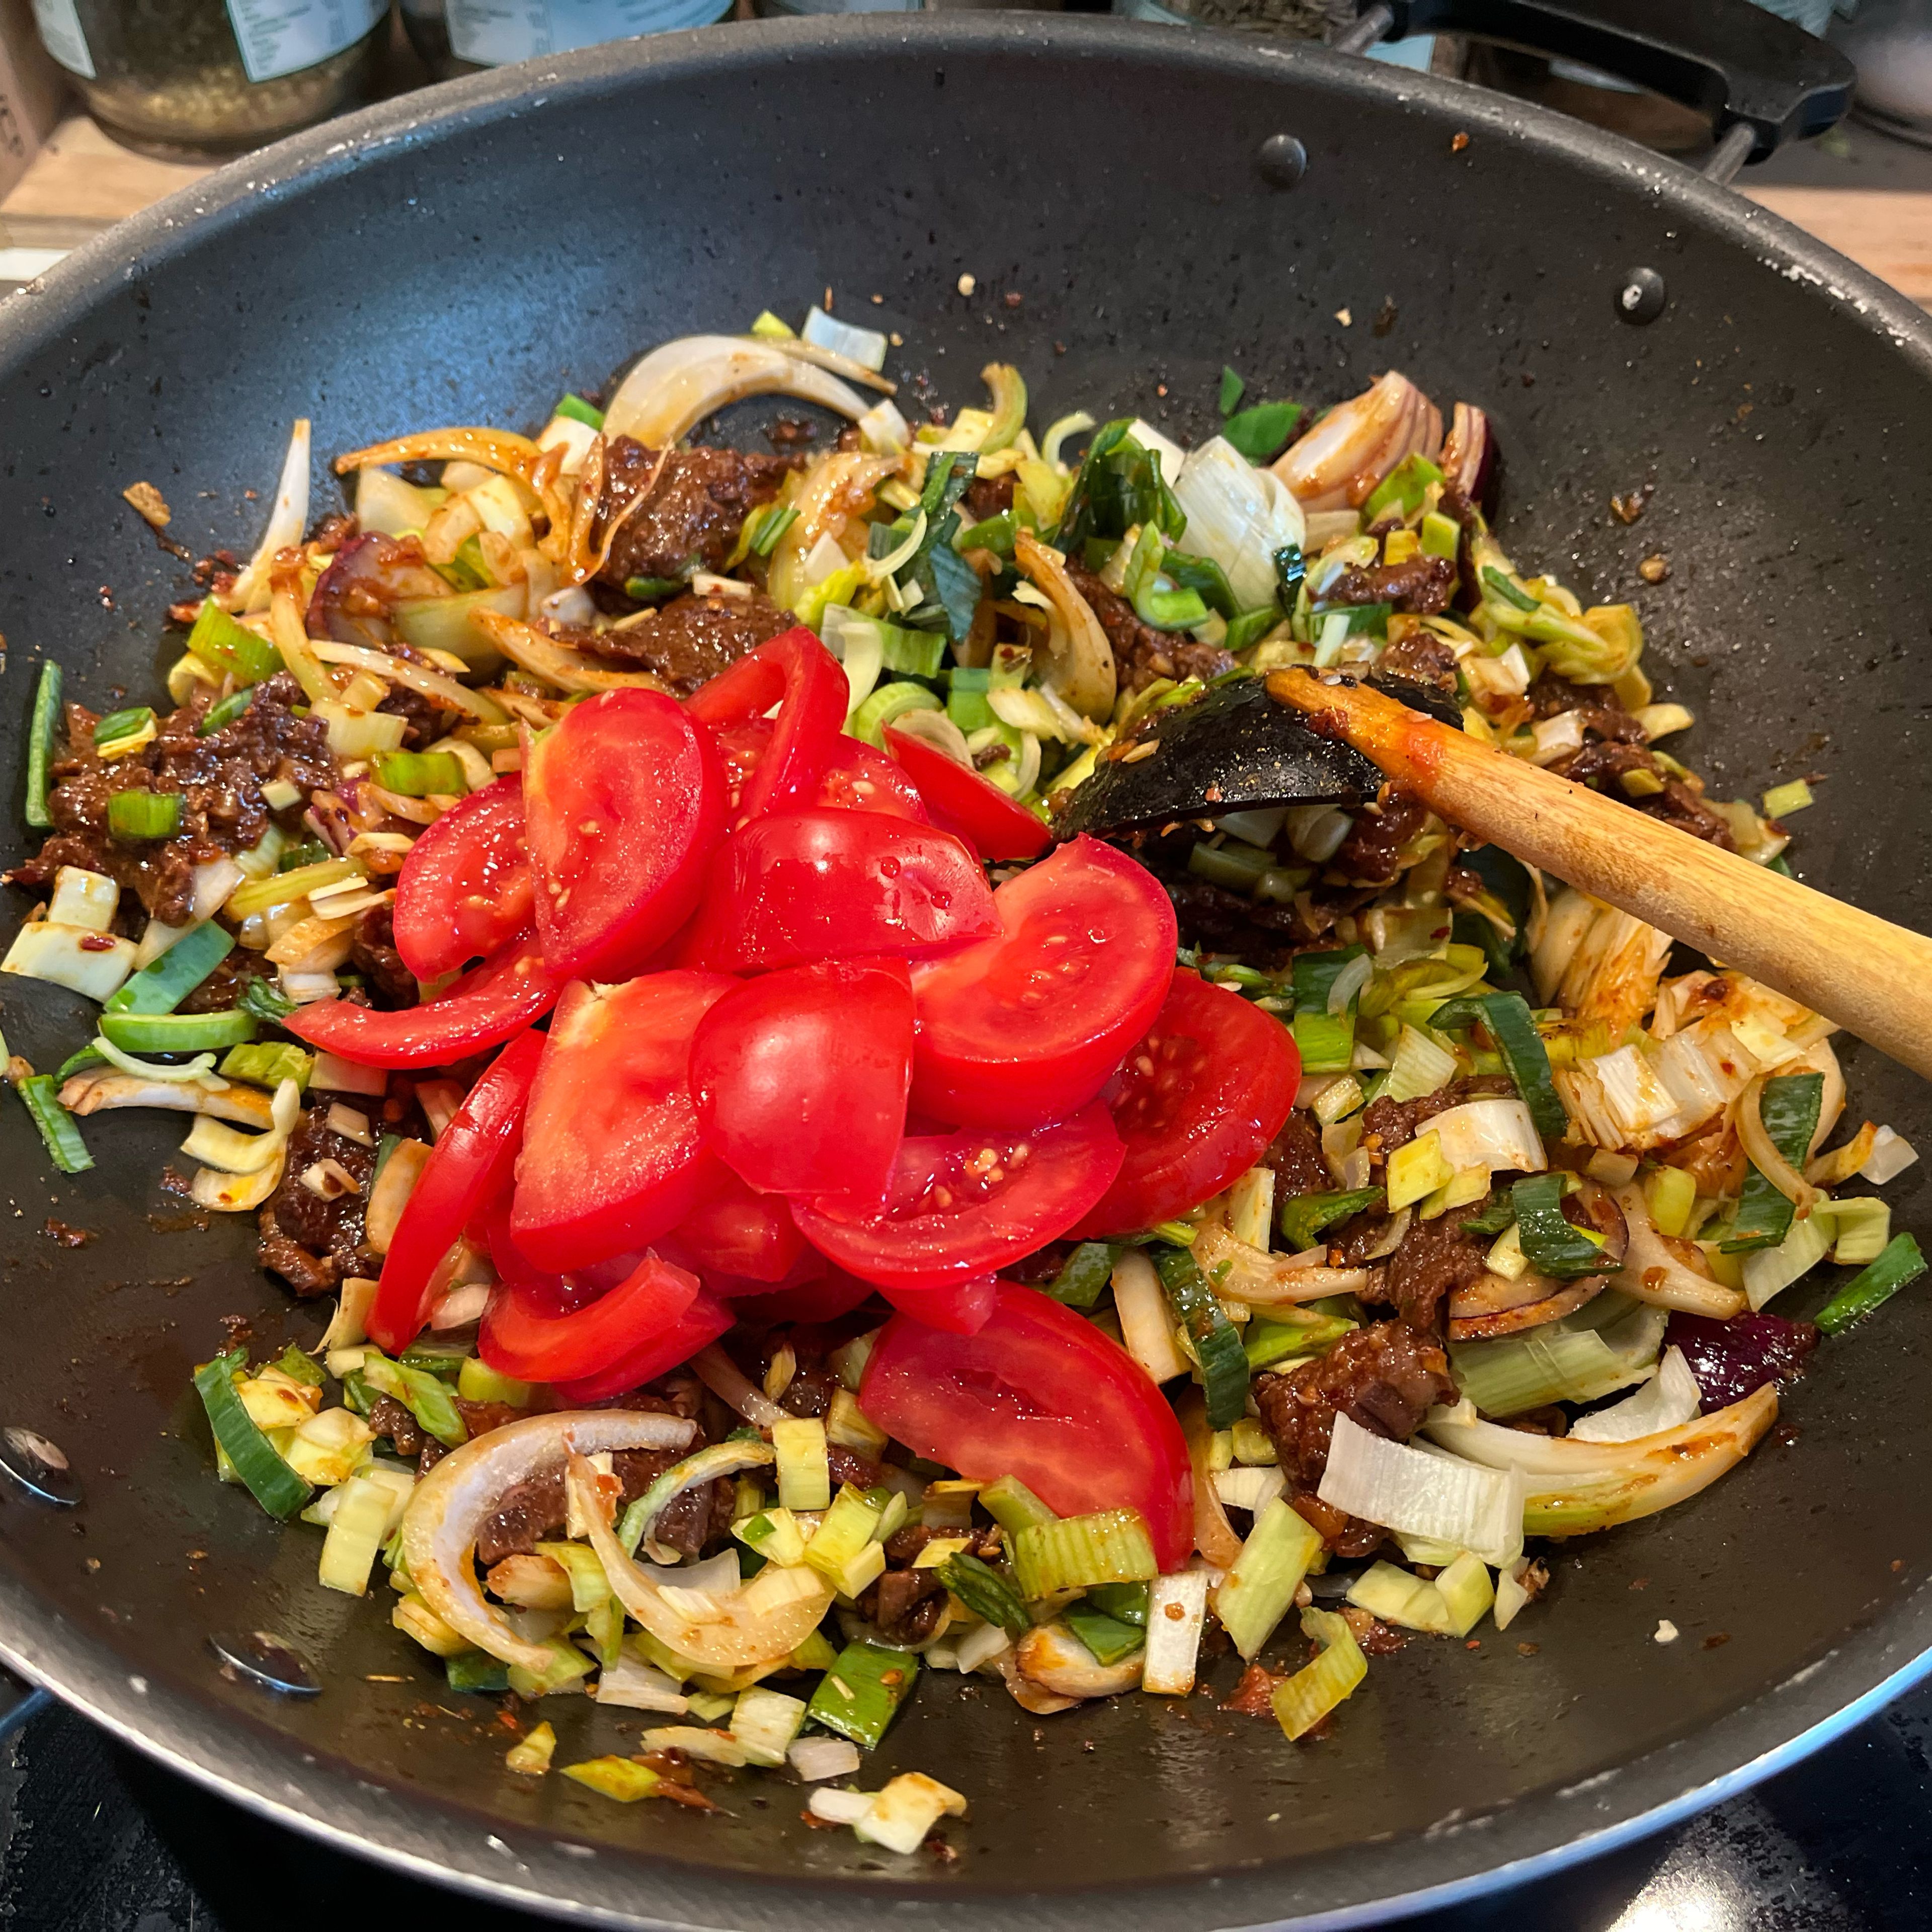 Add tomato sauce, soy sauce, sugar, onion, leeks and tomatoes. Keep stirring until veggies are cooked. Taste and add remaining salt to taste and mix. Remove from heat and serve with rice.